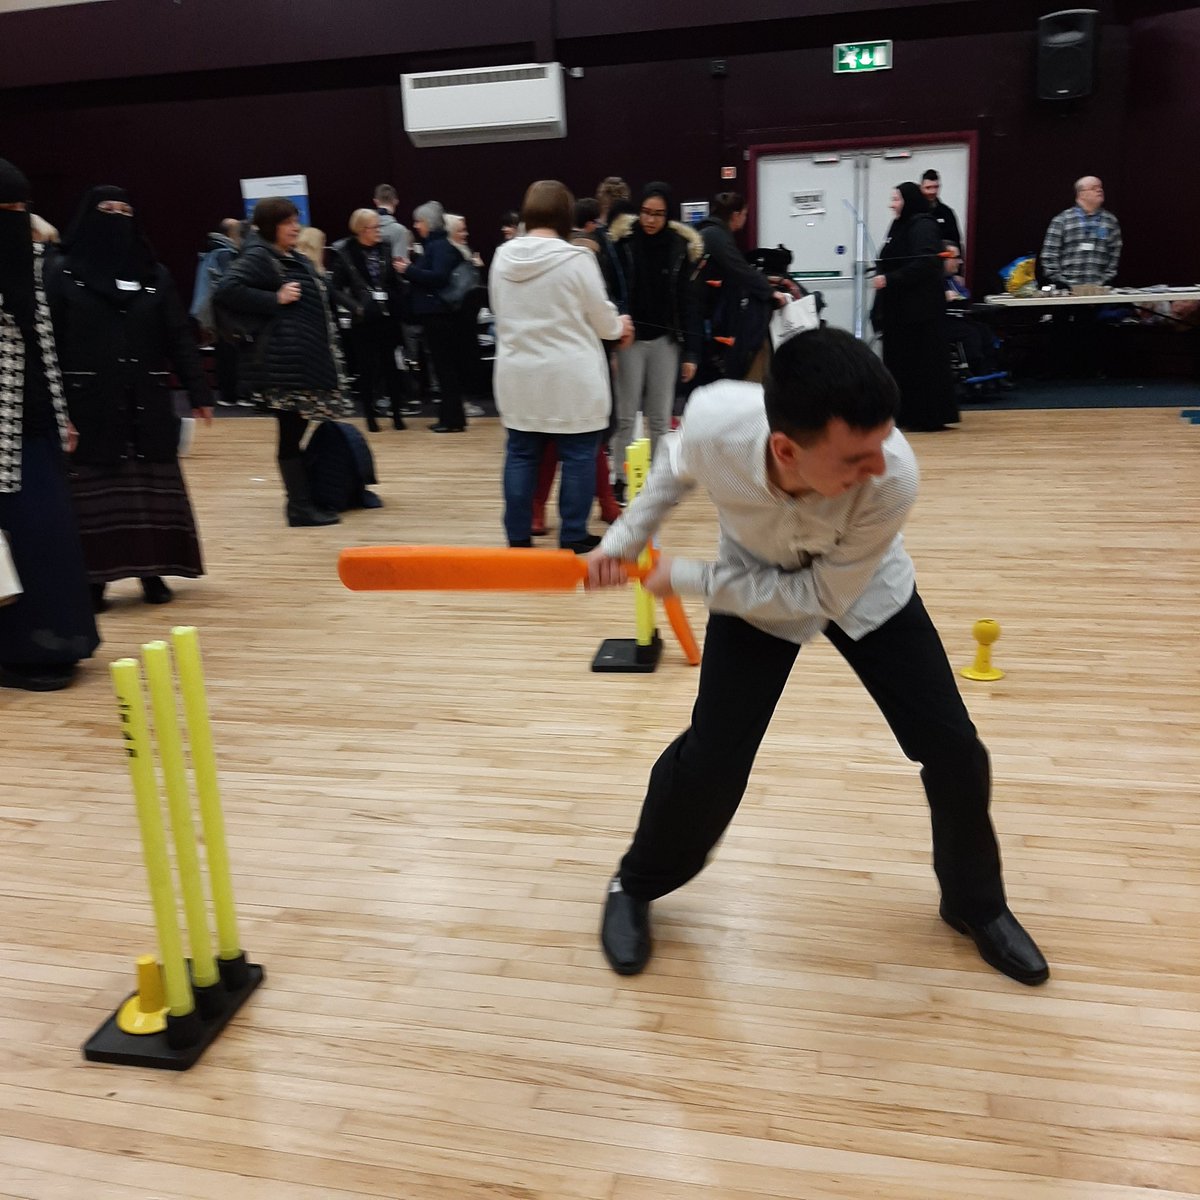 Demonstrating @yorks_super1s Mixed Ability Cricket at @NHSBfdCraven LD Event
@AllForActivity @Active_Bradford @Sport_England @ModalityGP @WYHpartnership